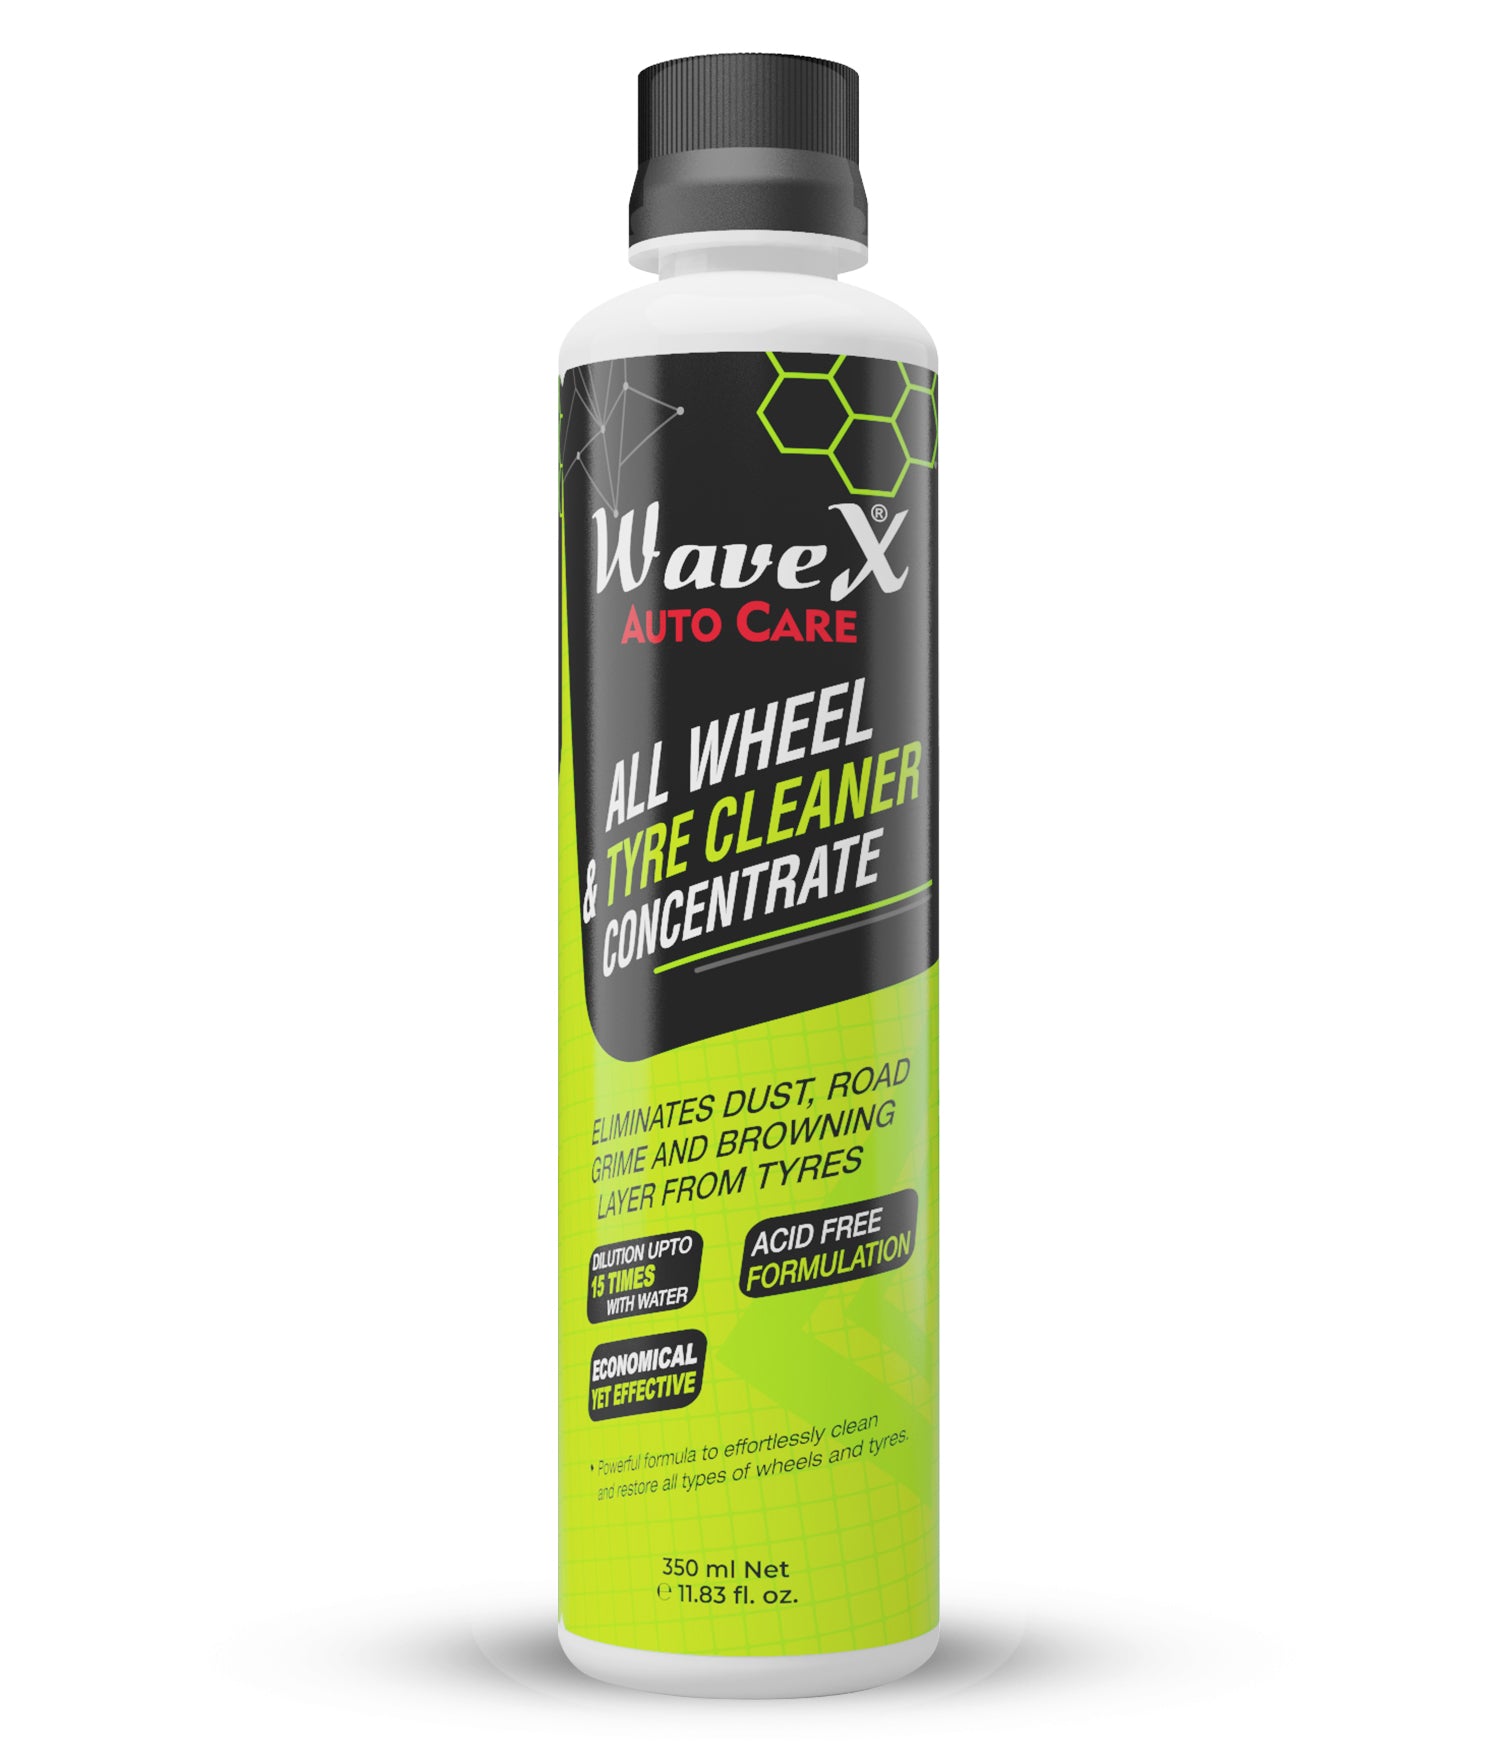 All Wheel And Tyre Cleaner Concentrate Dilutes 15 times with water- Tyre, Rims and Wheel Cleaner For All Cars and Bikes